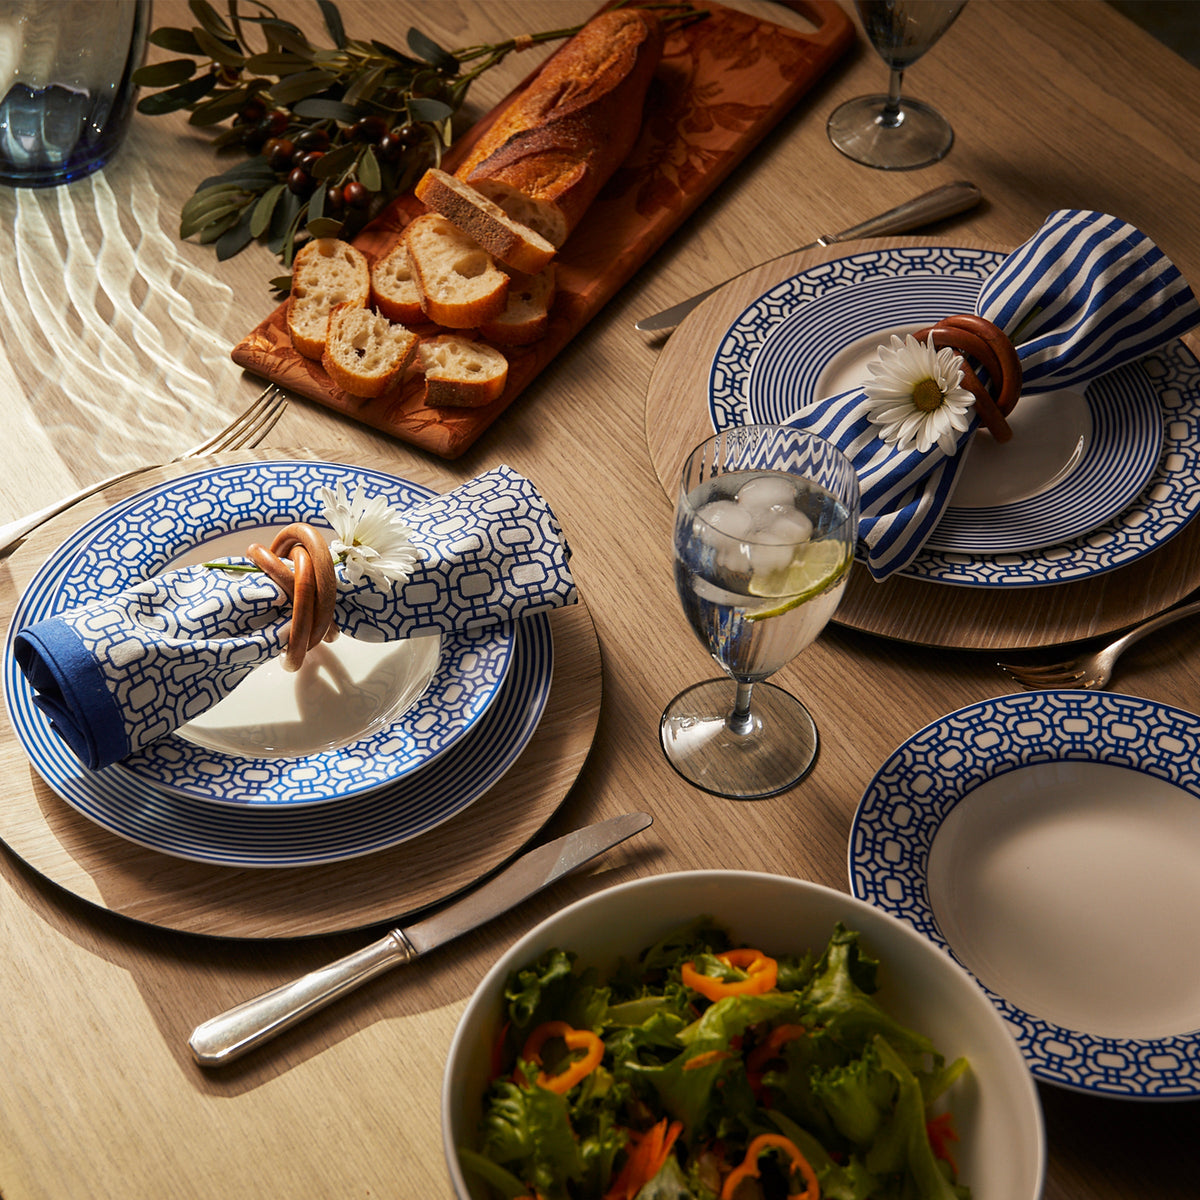 A blue and white plate with a Caskata Newport Garden Gate Dinner Napkins in Blue Set/4 salad on it.